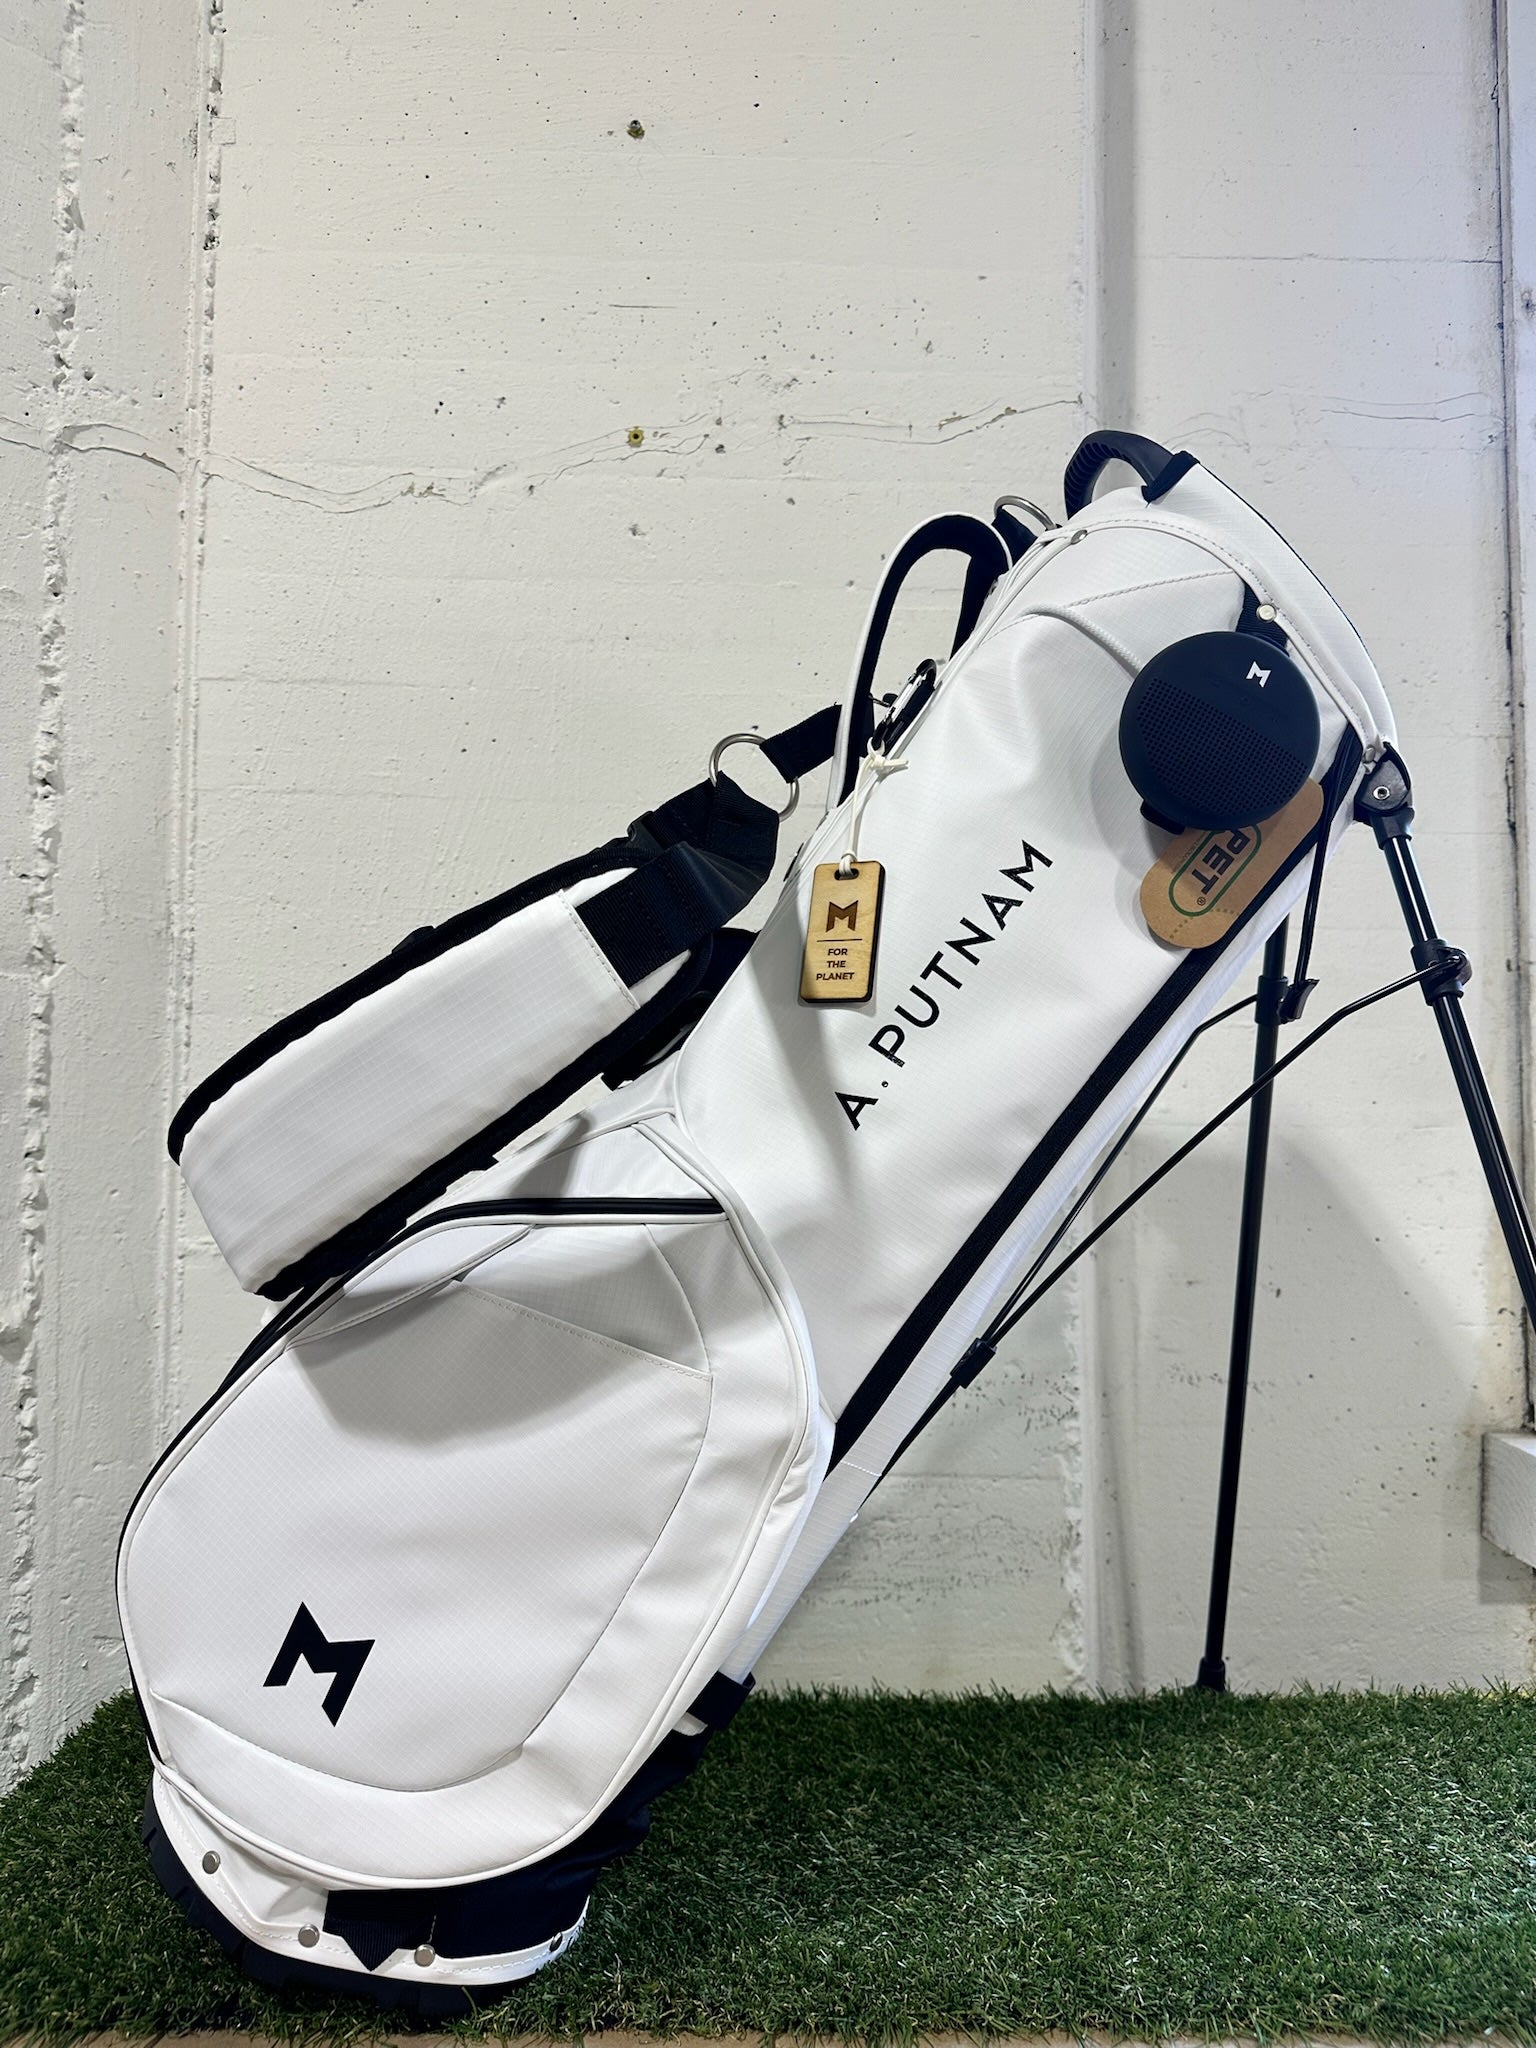 A. Putnam hand painted on the white MR1 sustainable golf bag. 